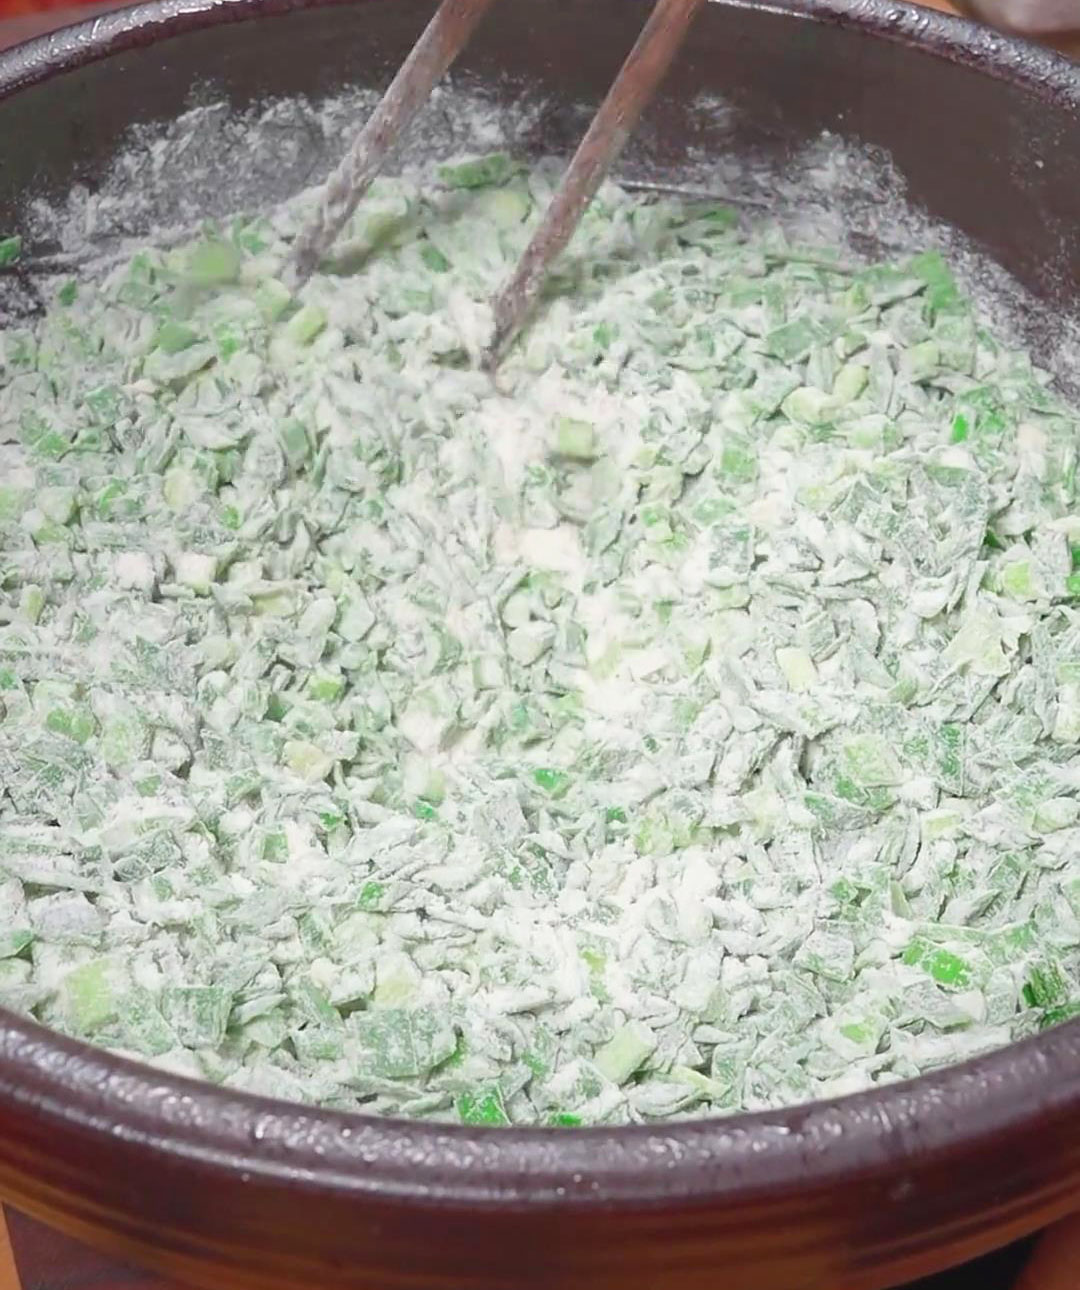 combine the chopped chives with two tablespoons of all purpose flour